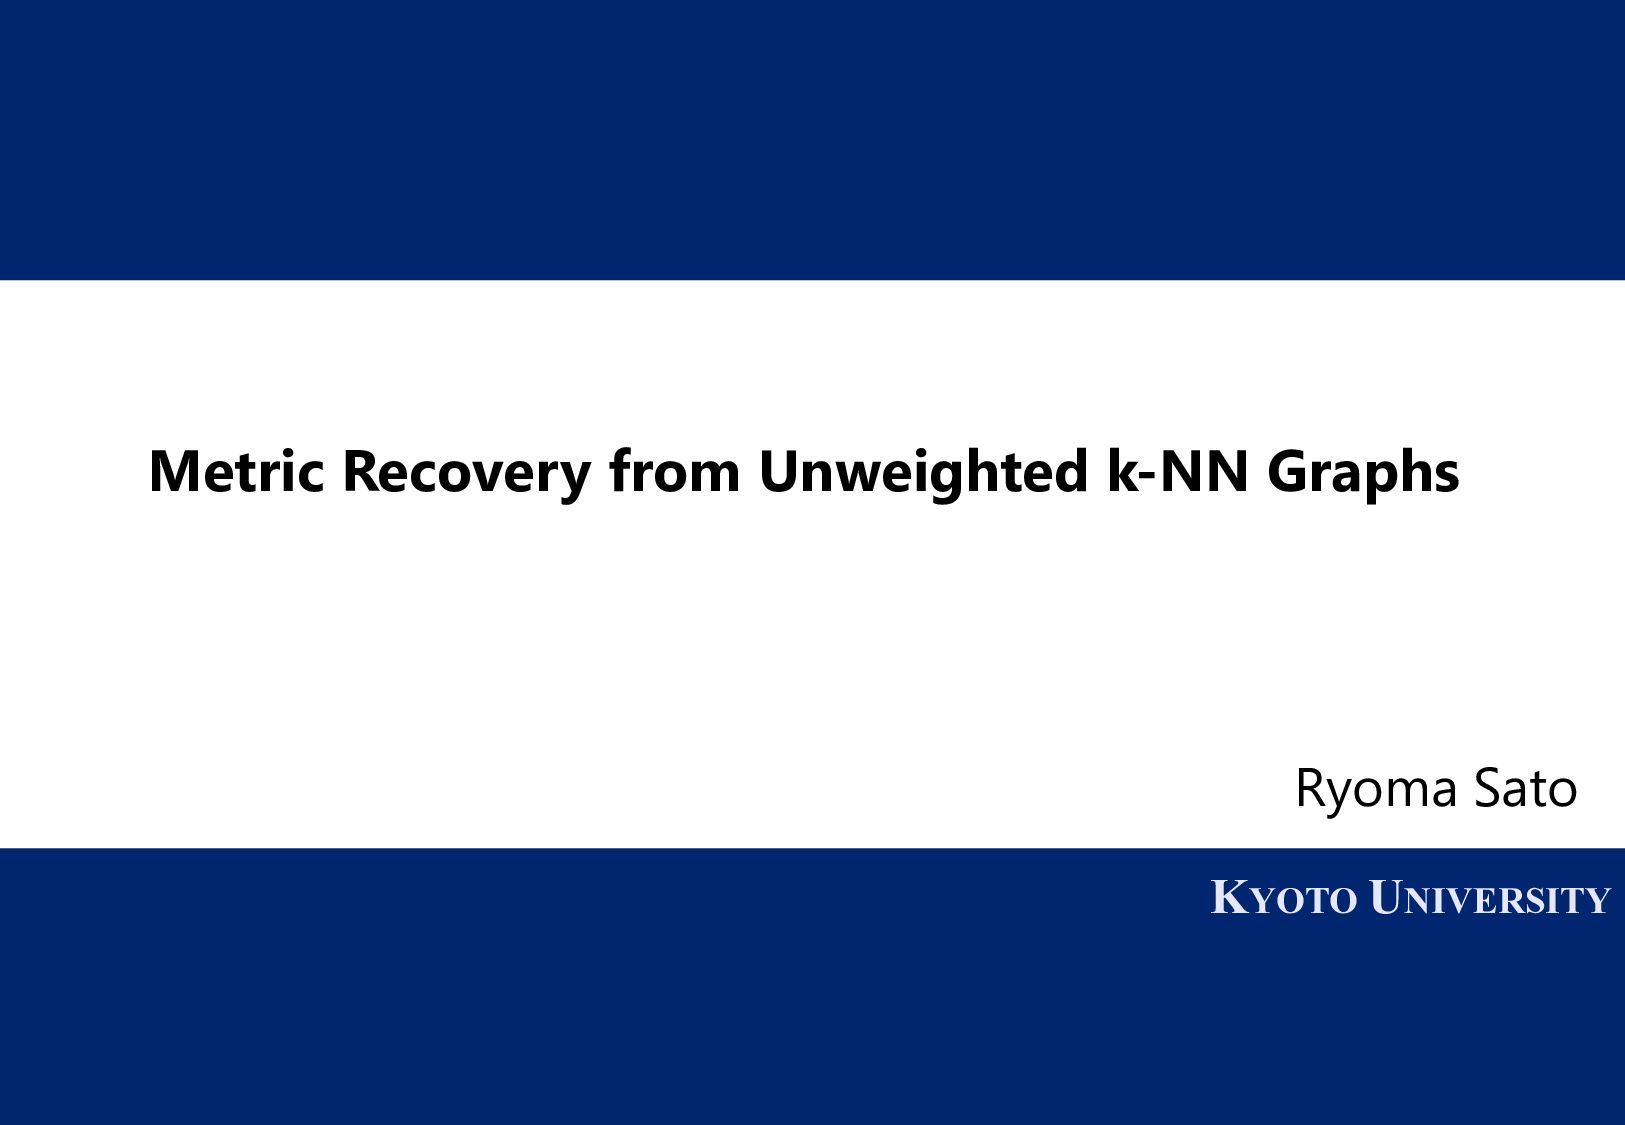 Metric Recovery from Unweighted k-NN Graphs